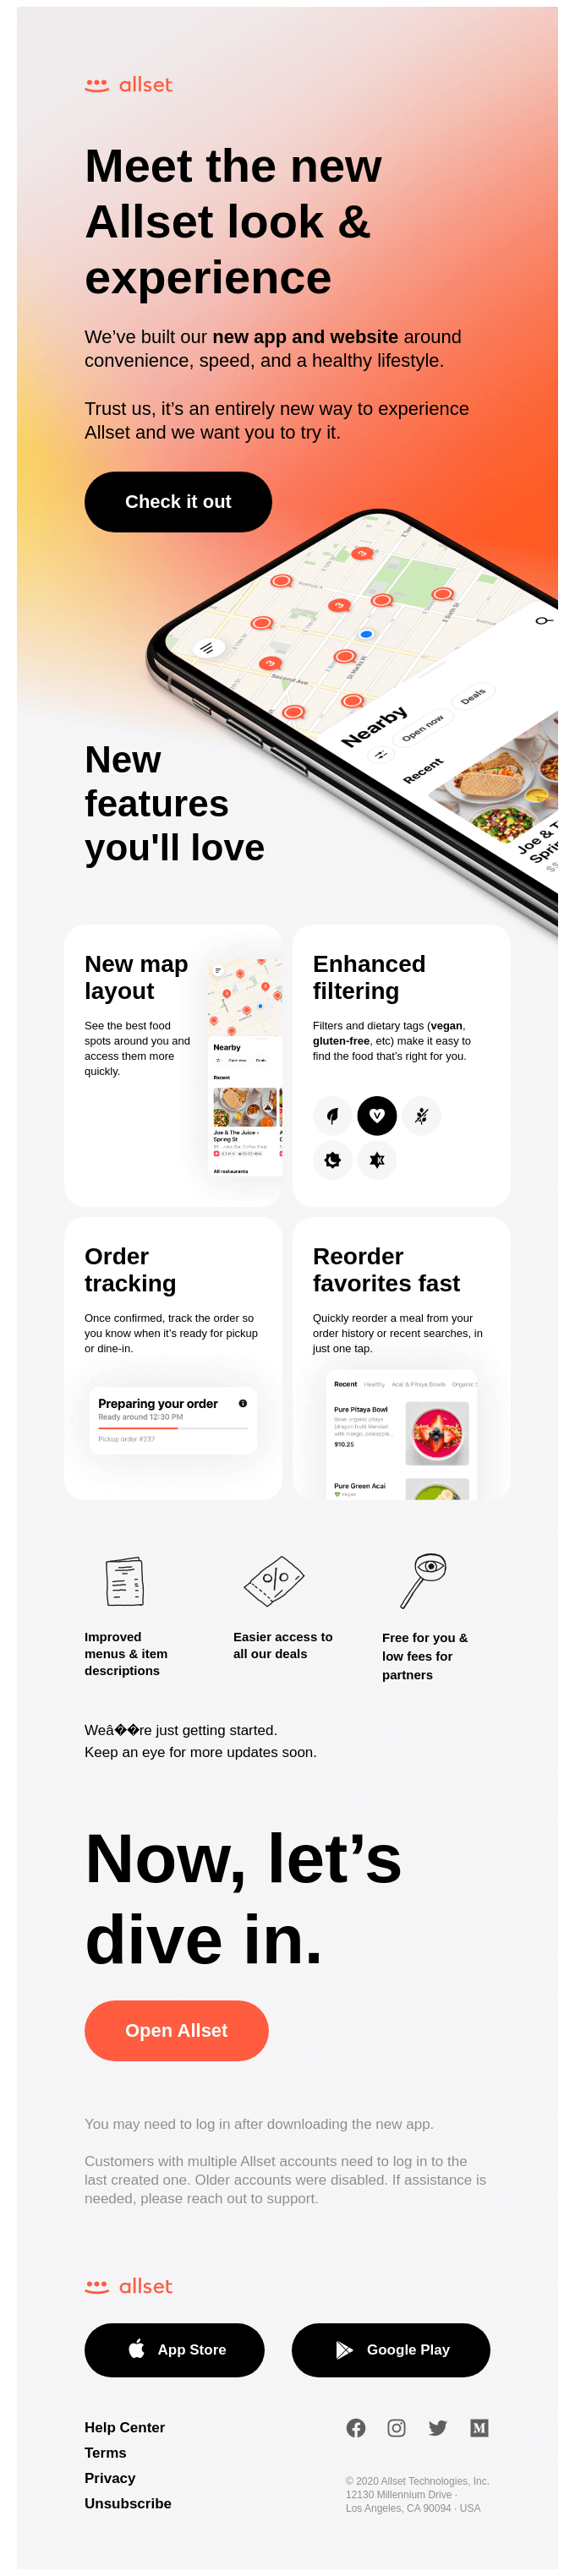 Introducing the new Allset app